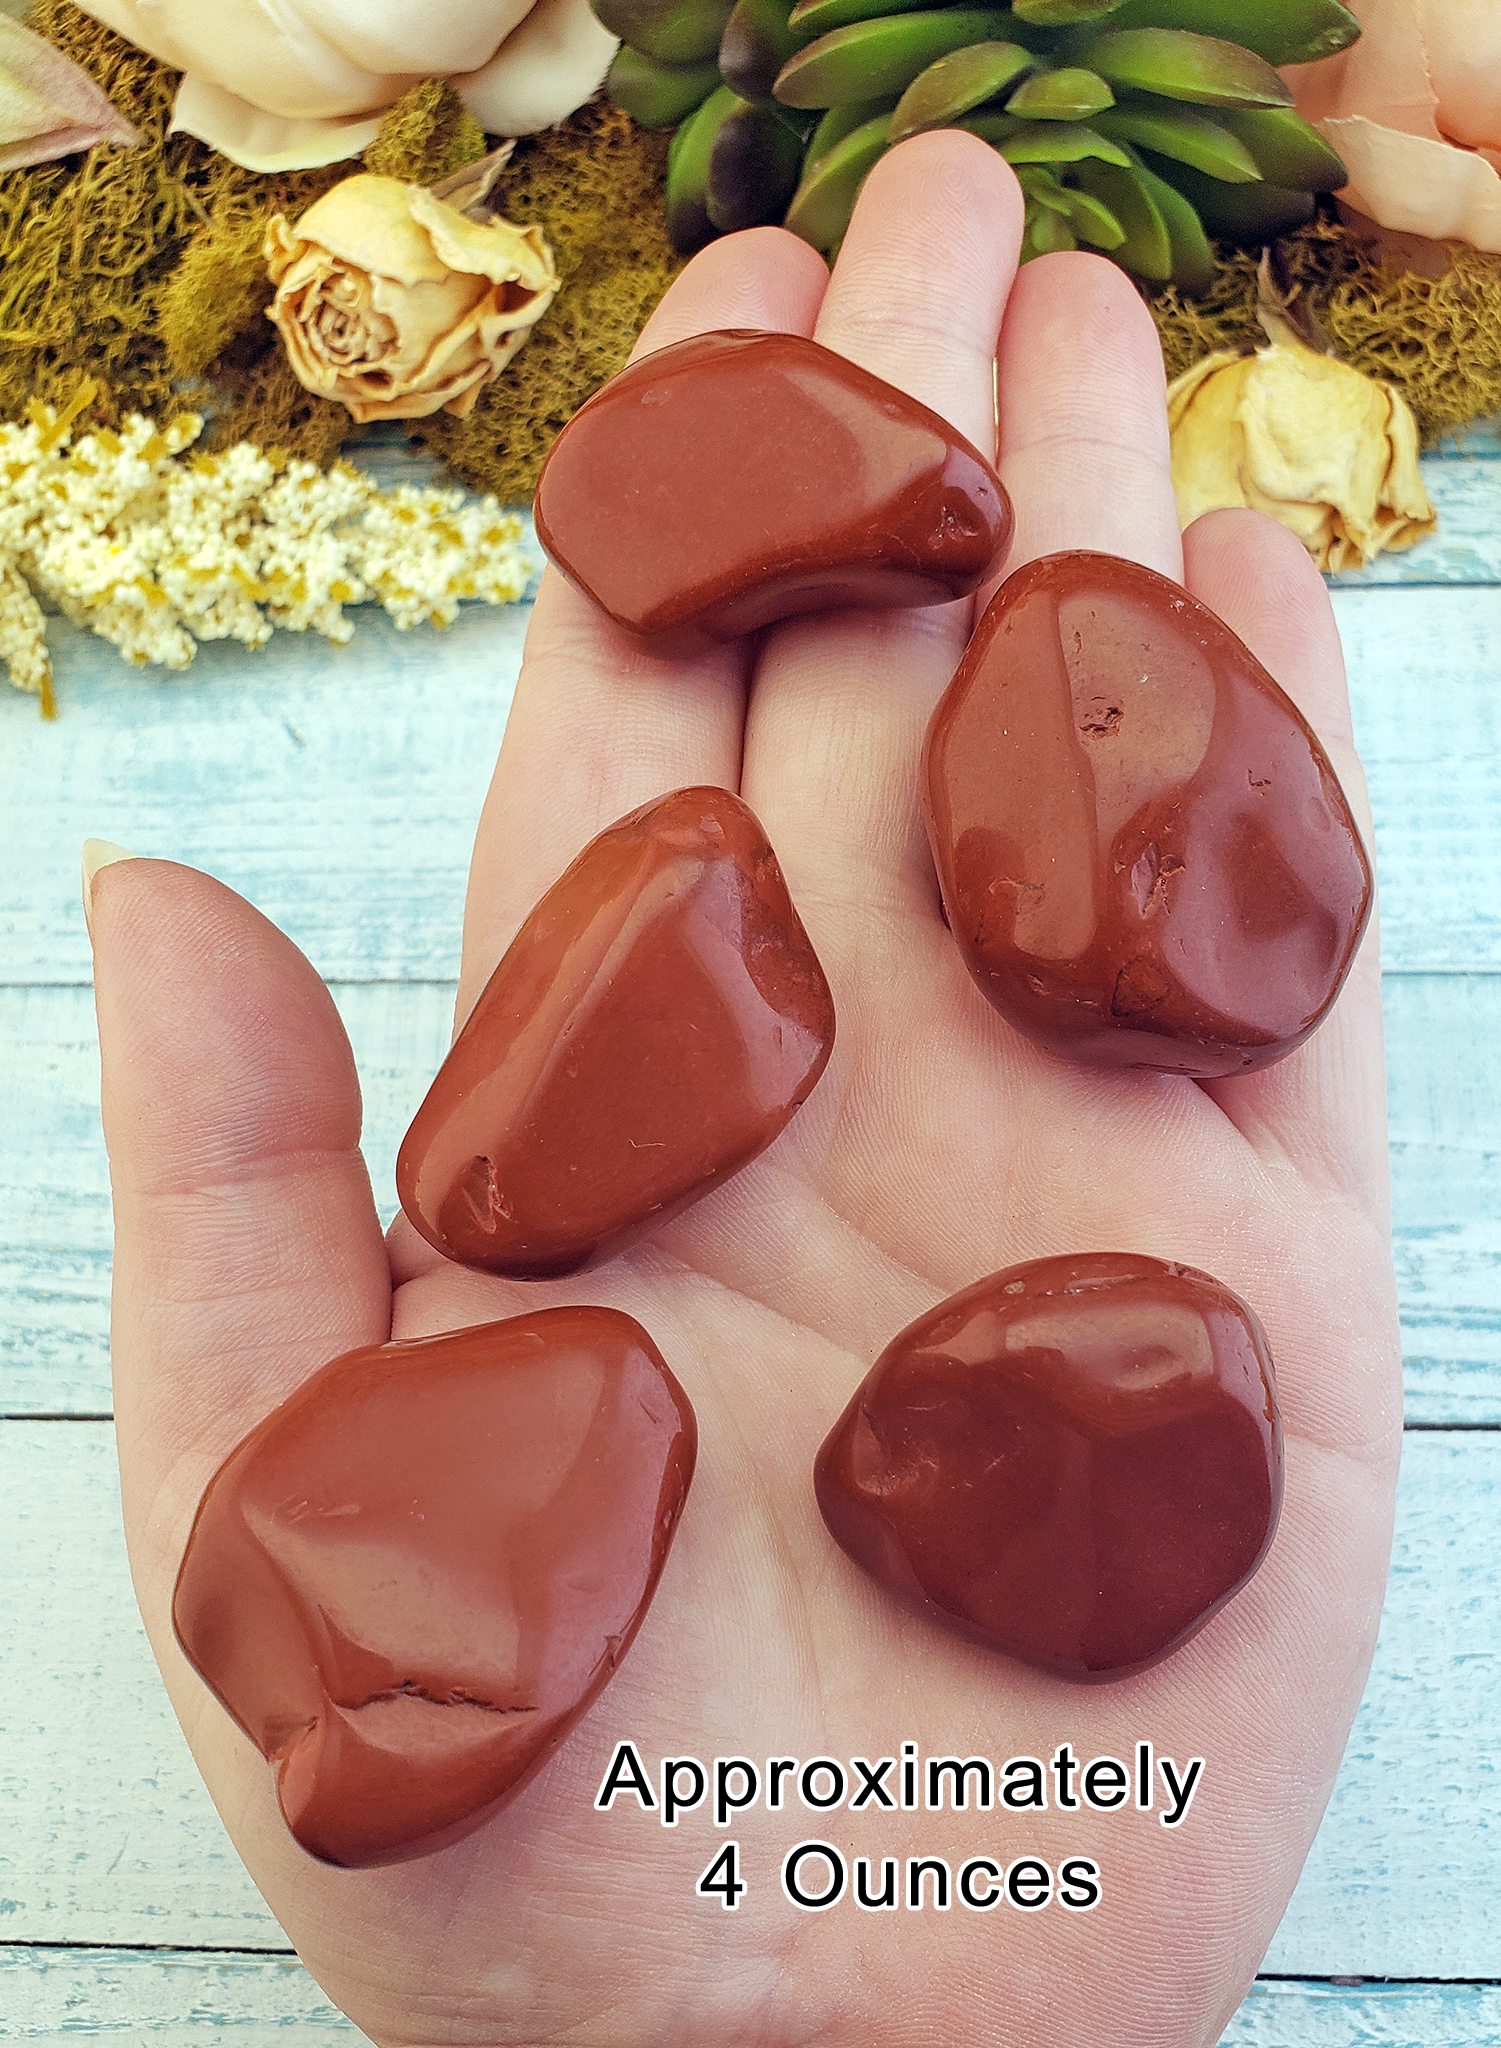 Red Jasper Natural Tumbled Gemstone - 4 Ounces in Hand